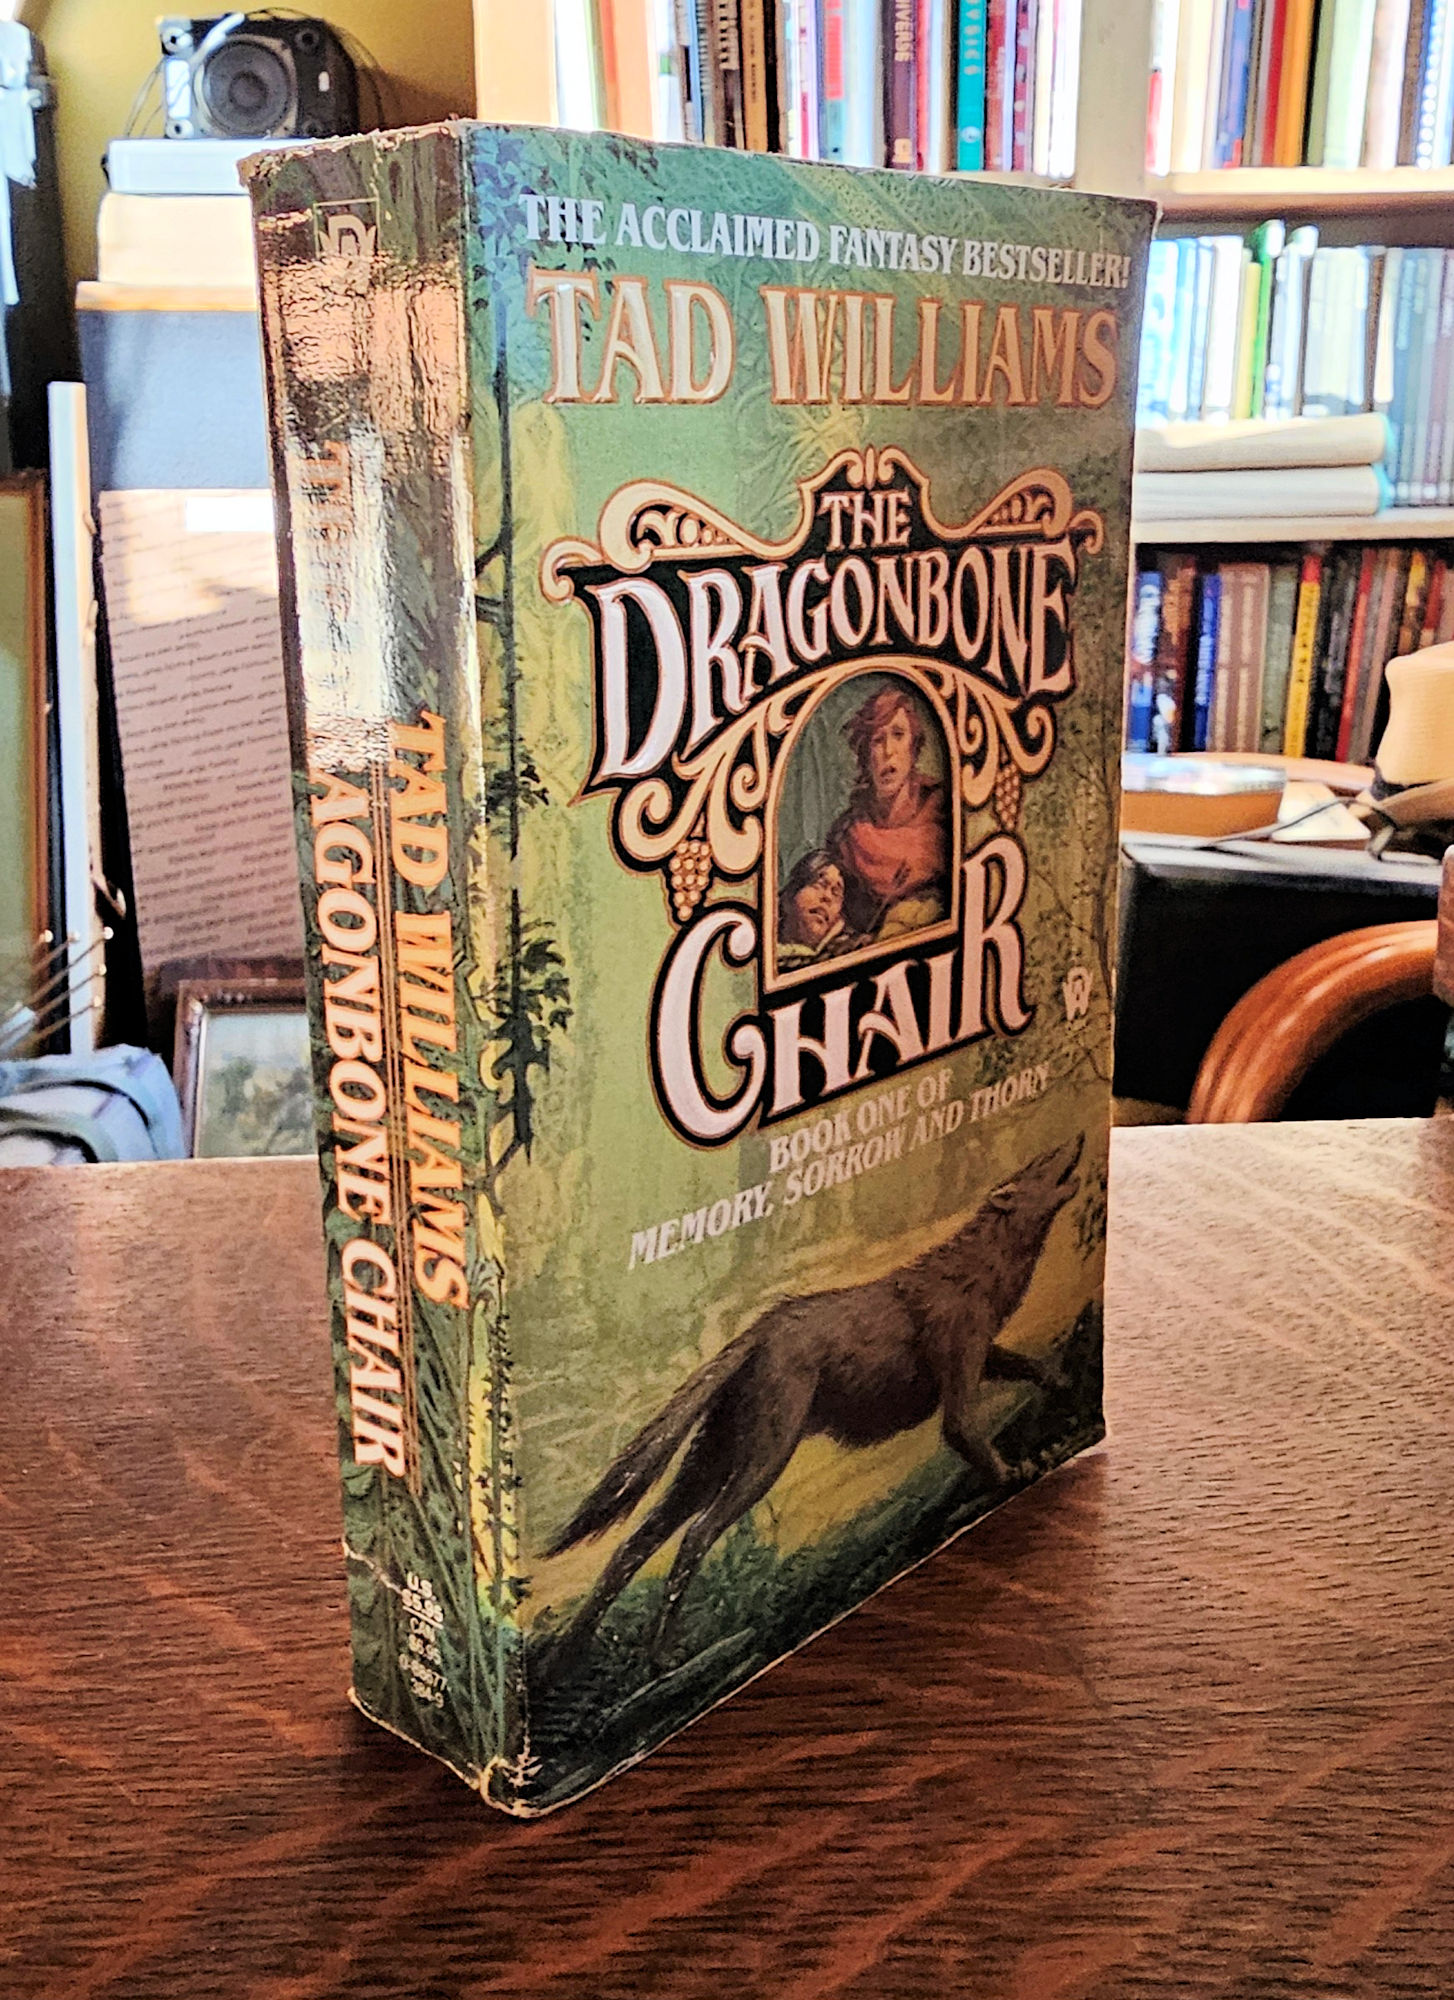 1989 The Dragonbone Chair by Ted Williams;
                        Book 1 (Memory, Sorrow, and Thorn)